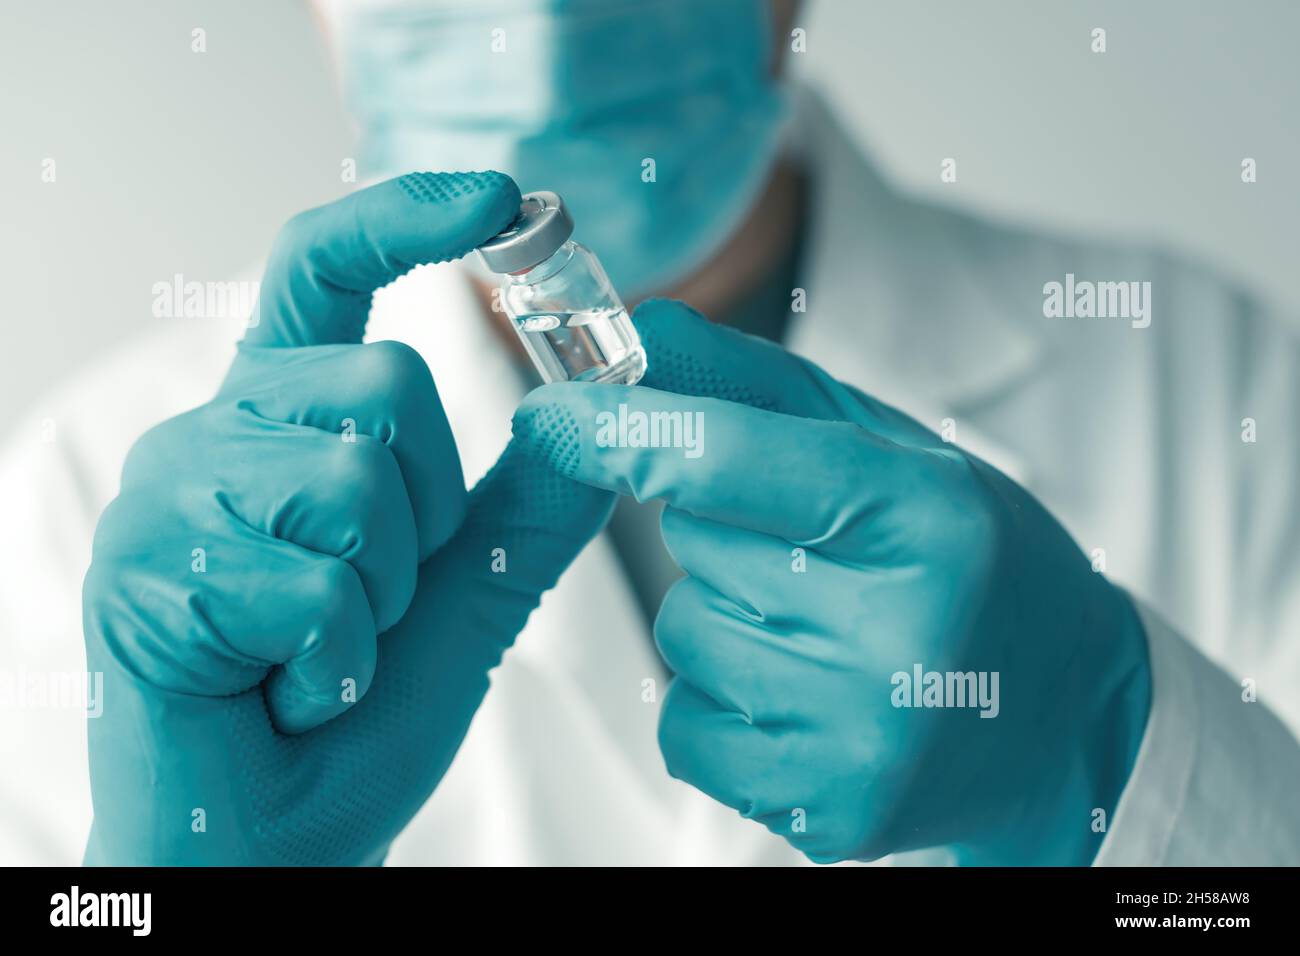 Medical professional with protective gloves and face mask holding booster shot Covid-19 vaccine bottle vial in hospital, selective focus Stock Photo